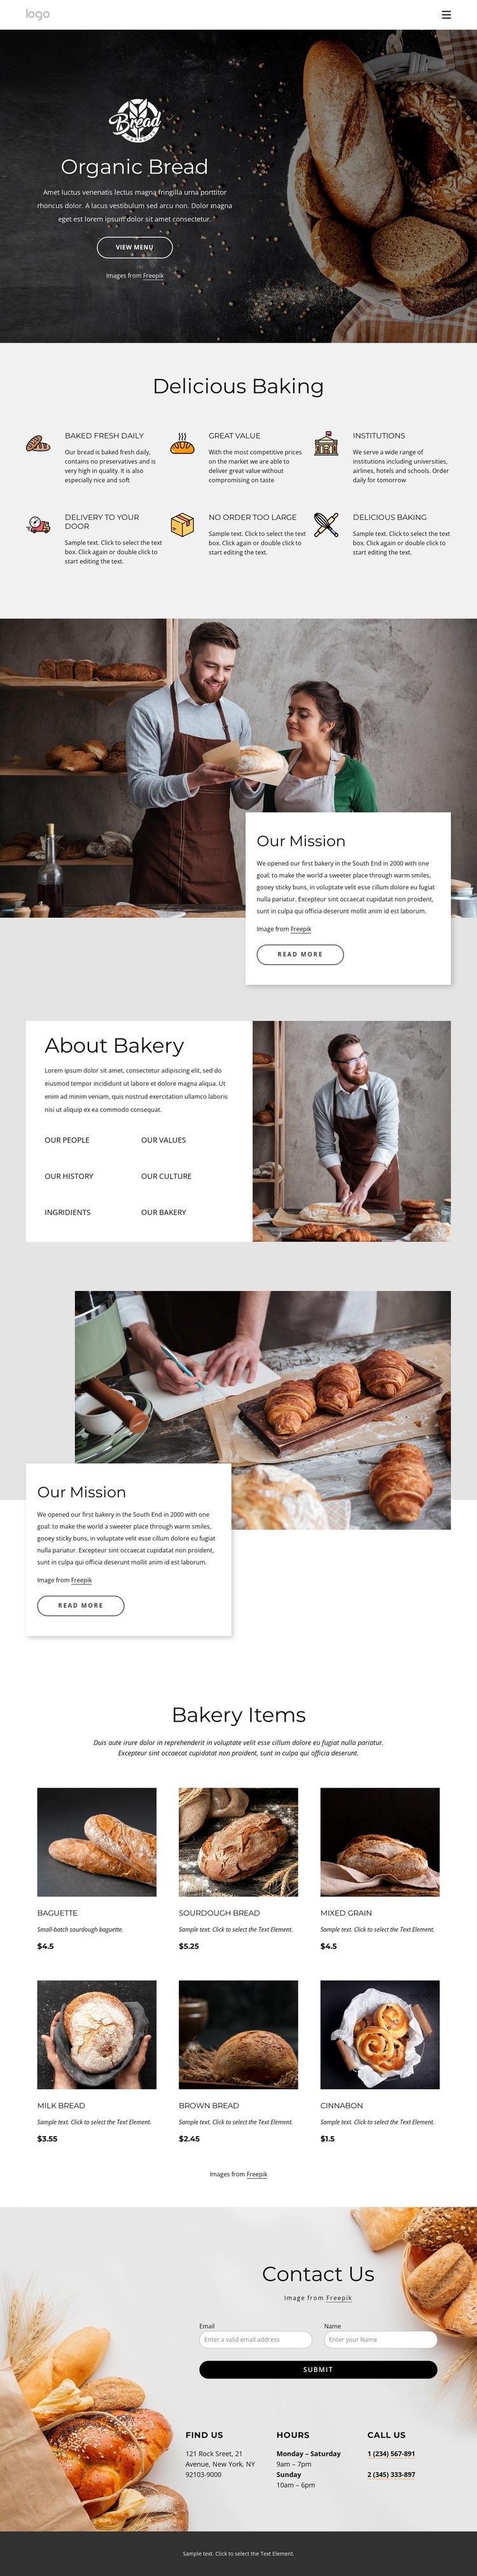 Bagels, buns, rolls, biscuits and loaf breads Elementor Template Alternative